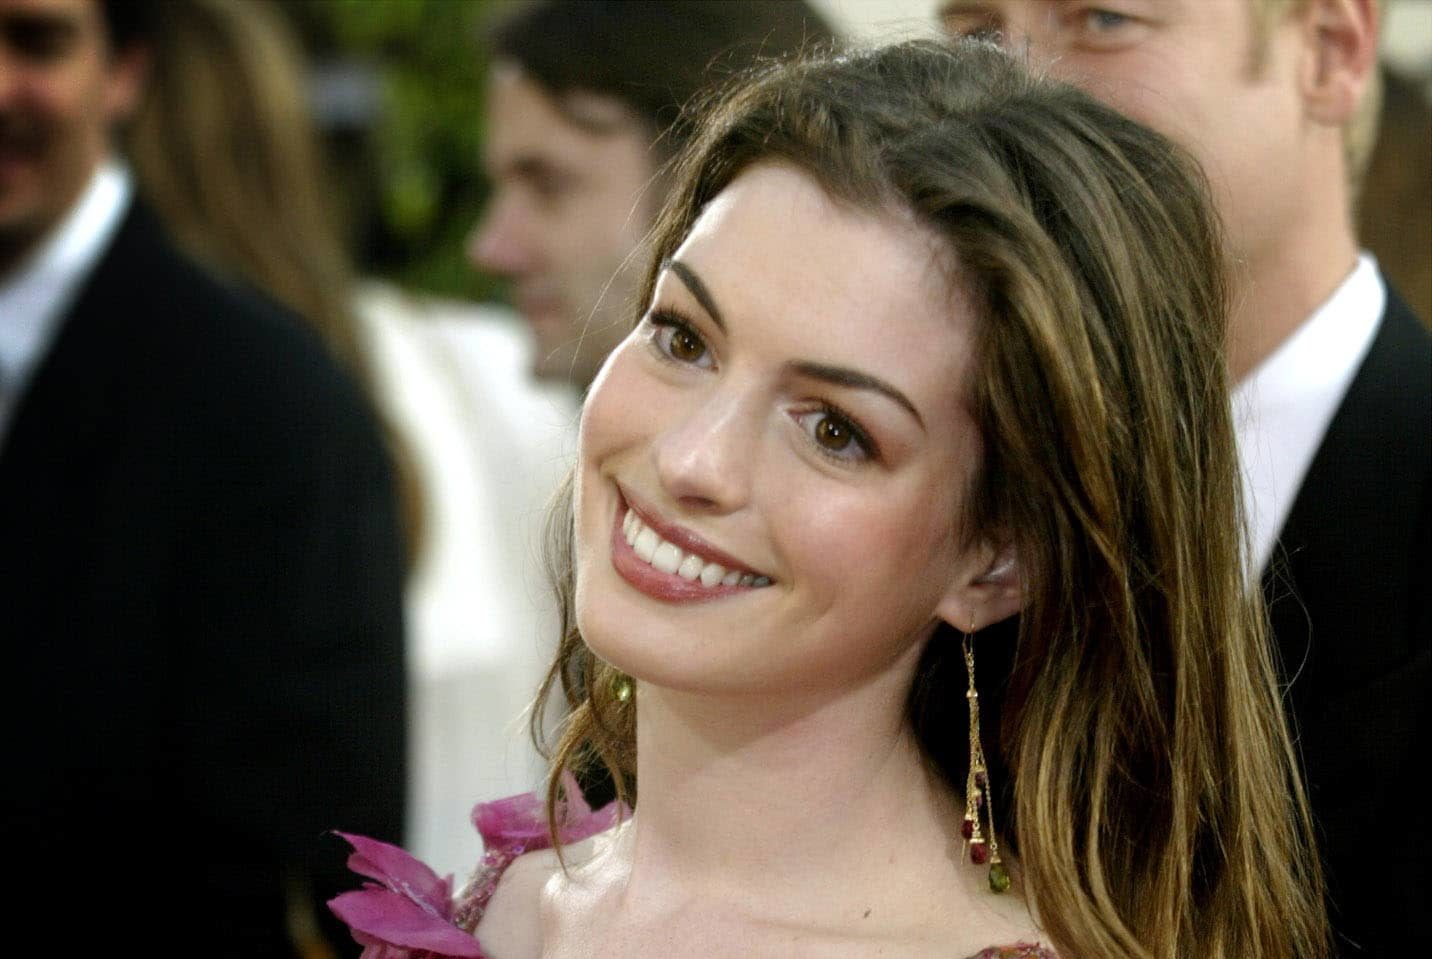 actress-anne-hathaway-arrives-at-the-60th-annual-golden-globe-awards-in-beverly-hills-california-ja